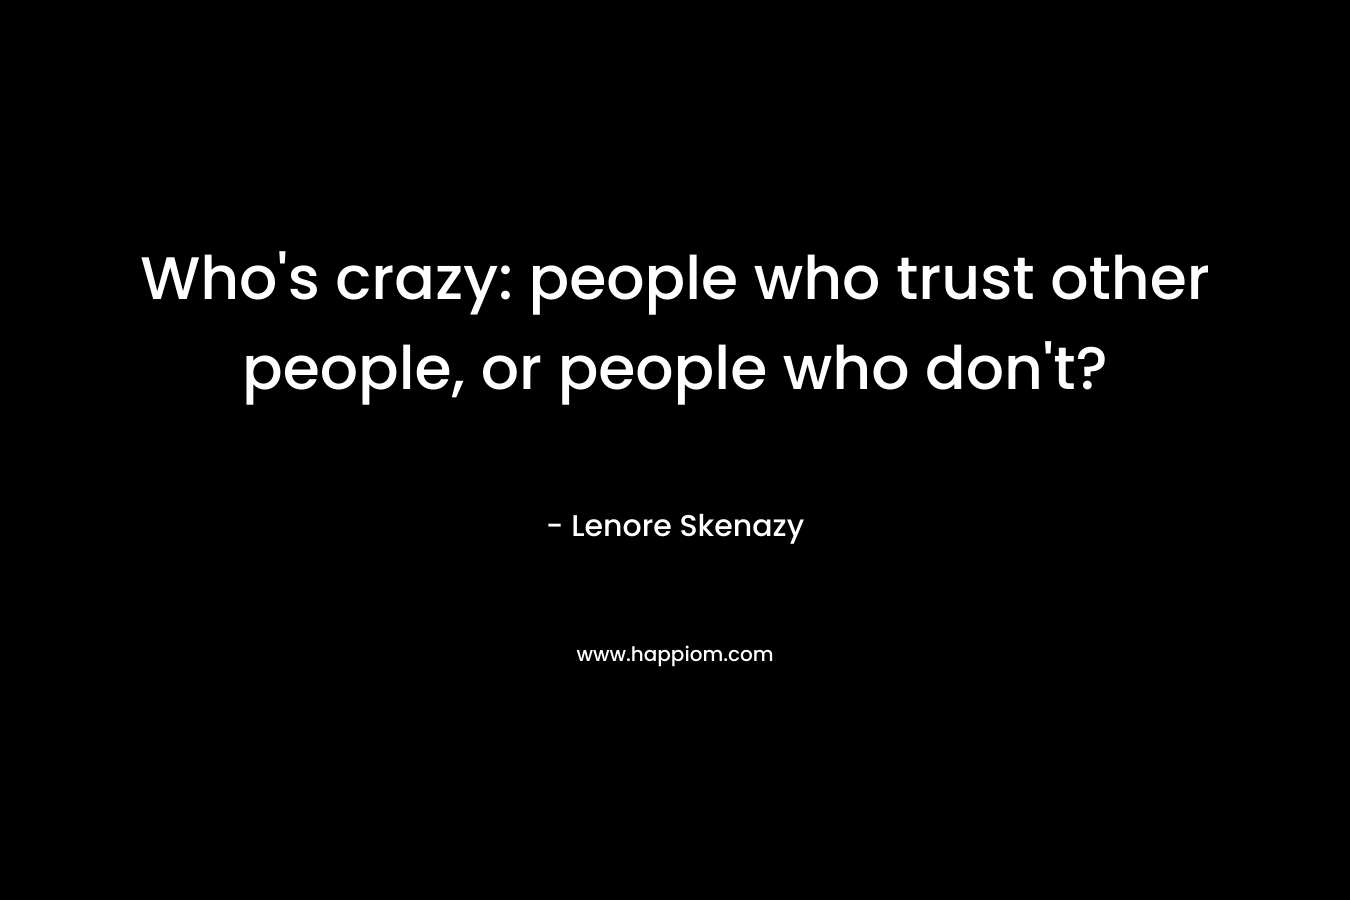 Who's crazy: people who trust other people, or people who don't?